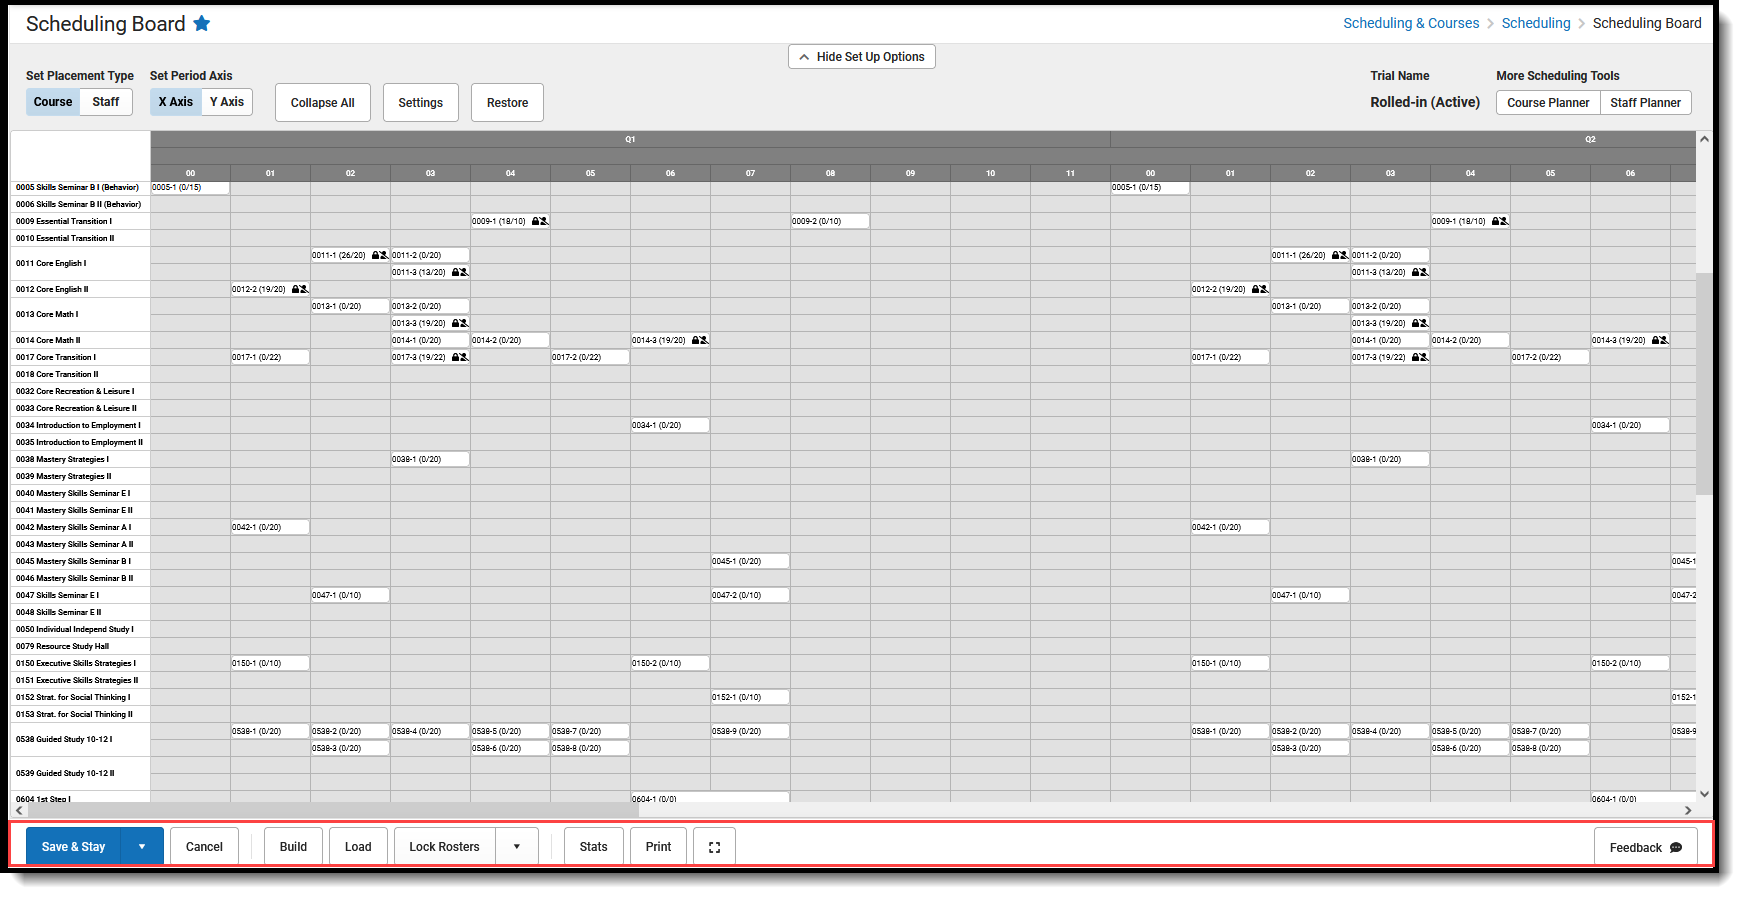 Screenshot of the available Scheduling Board actions.